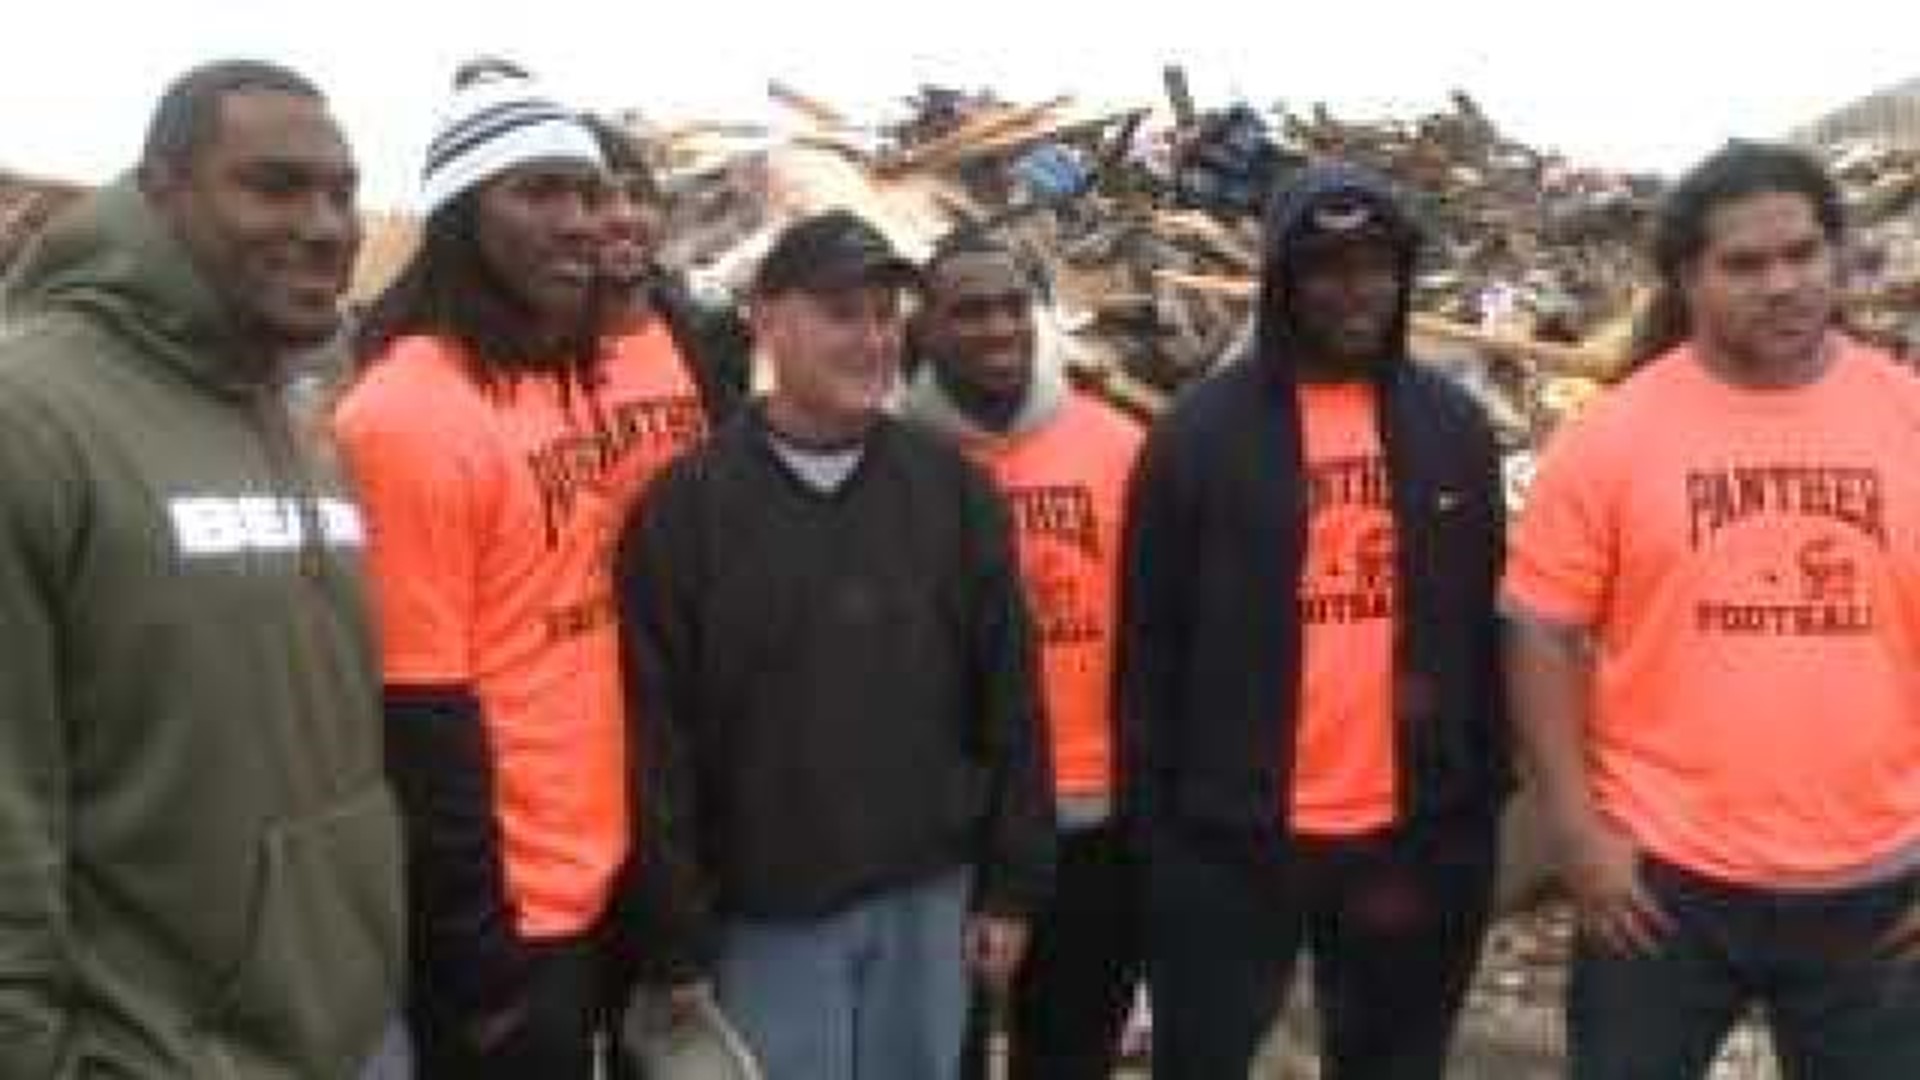 Chicago Bears help out in Washington